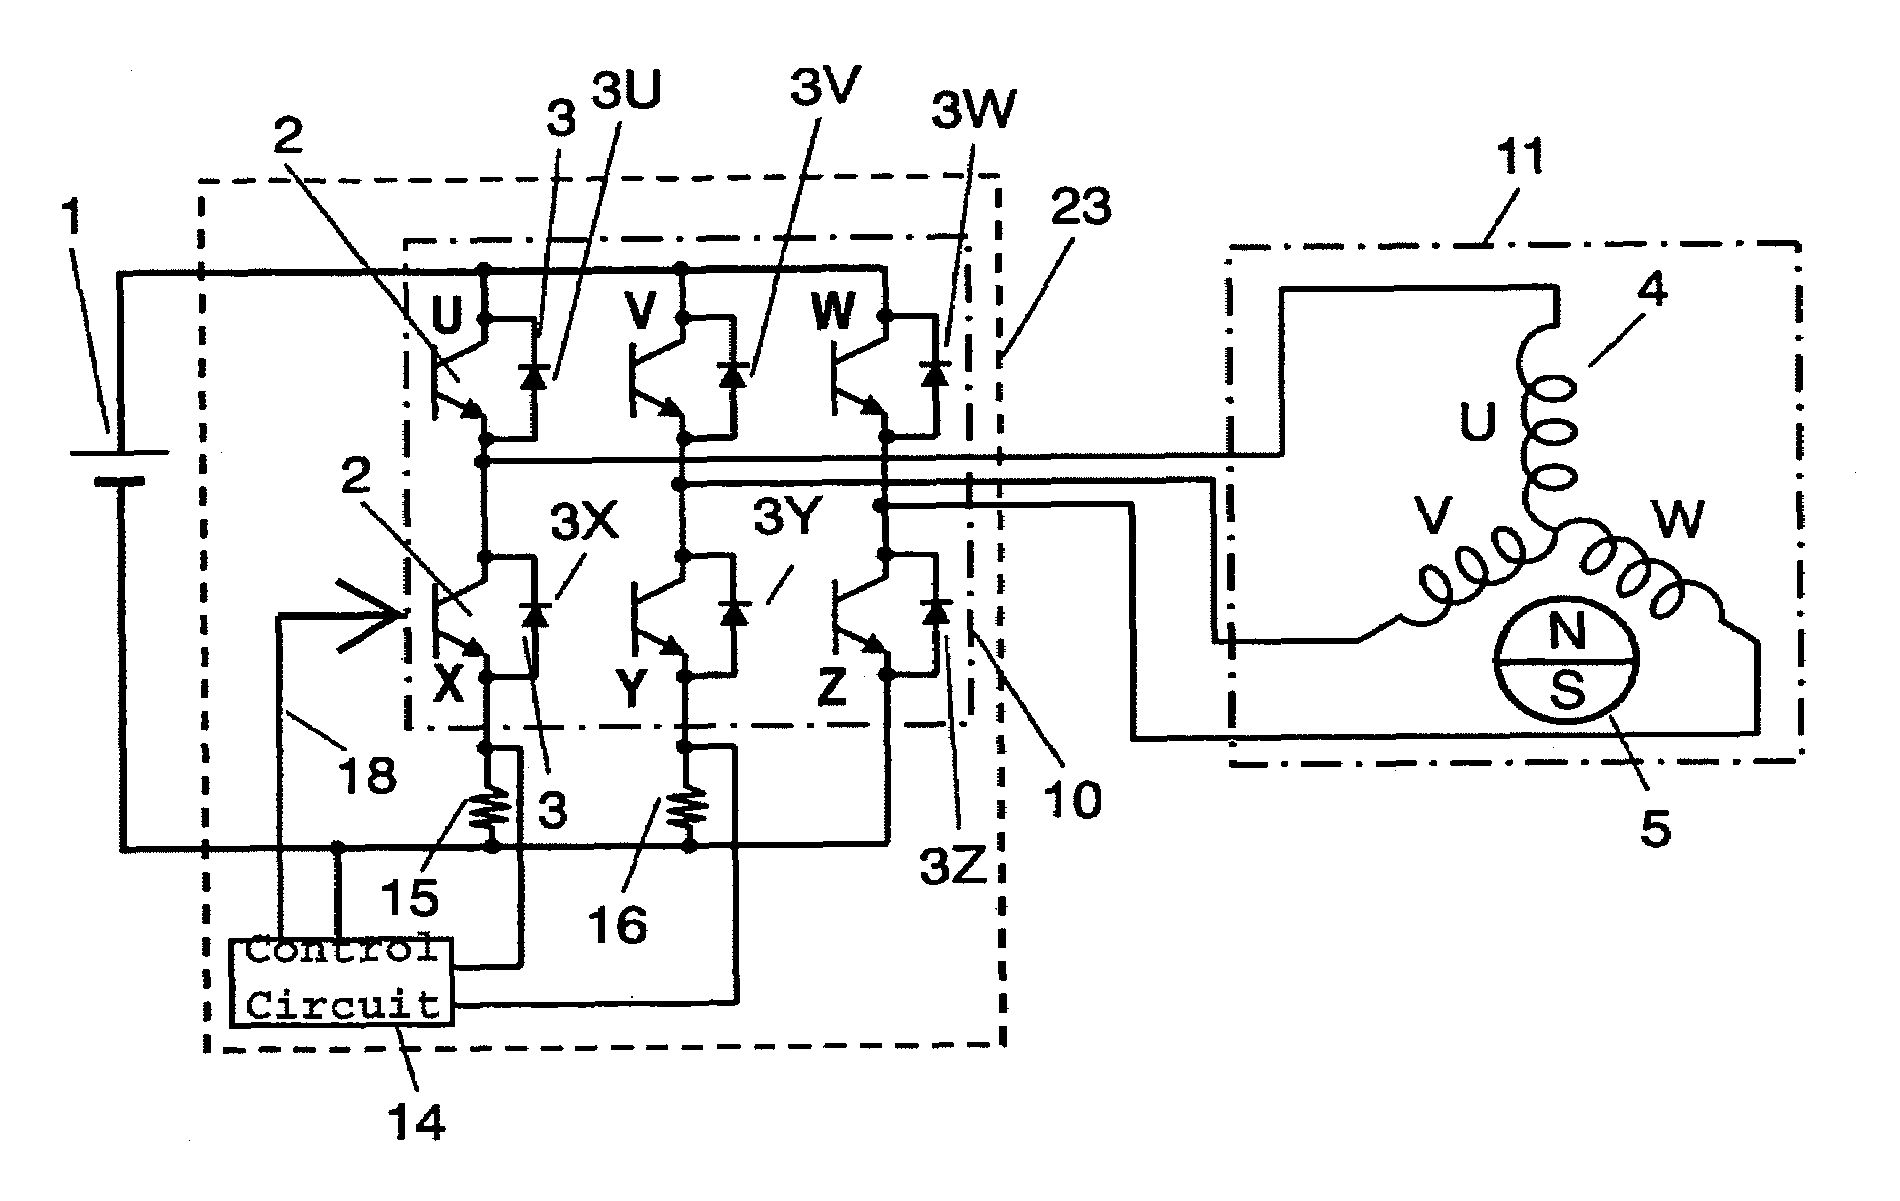 Three phase inverter control circuit detecting two phase currents and deducting or adding identical ON periods